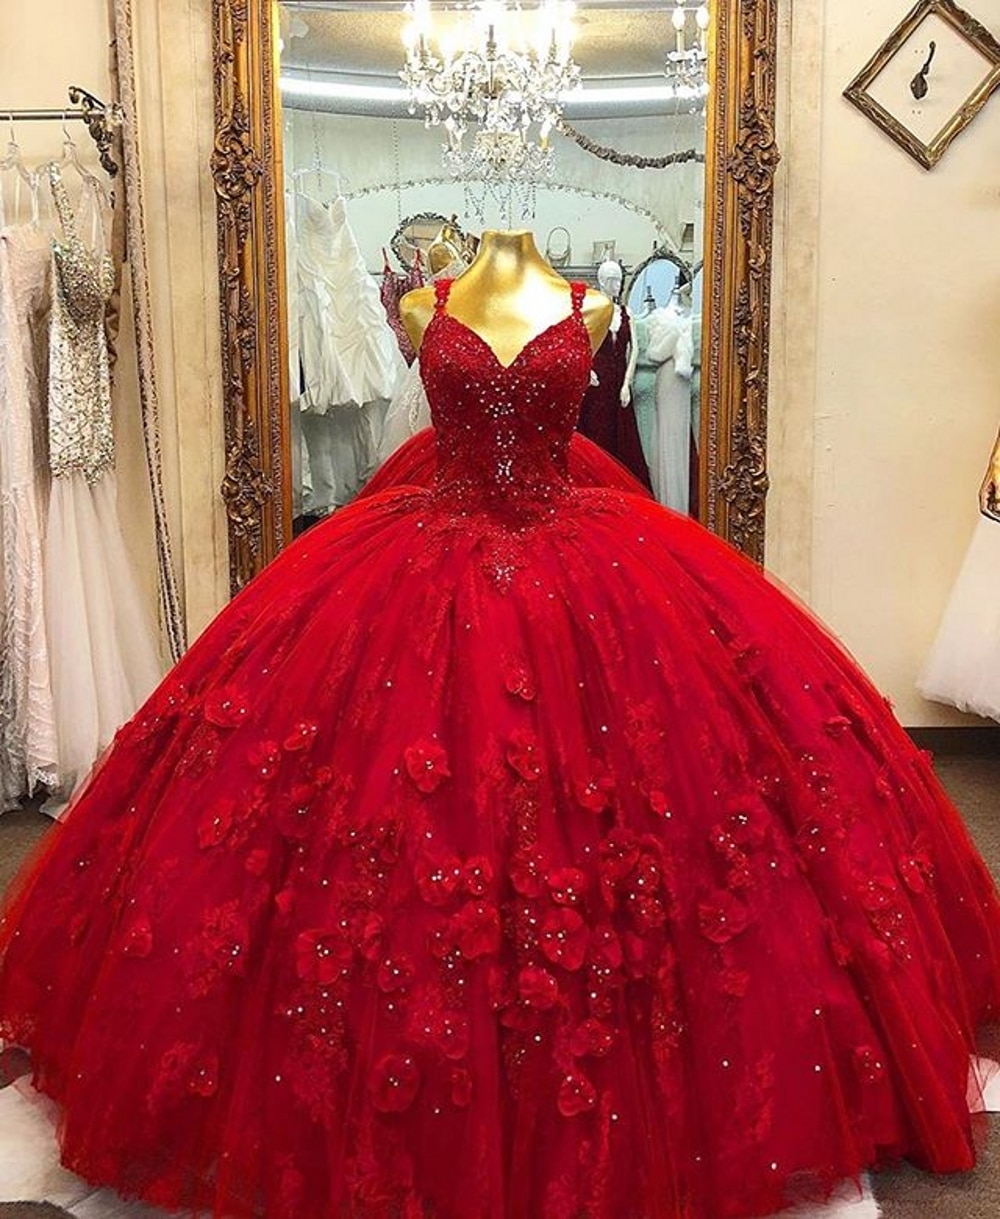 red quinceanera dress with flowers,red sweet 16 dress,quinceanera dress with 3d flowers,puffy sweet 16 dress,2021 quinceanera dress,quinceanera dress with straps,big ball gown quinceanera dress,